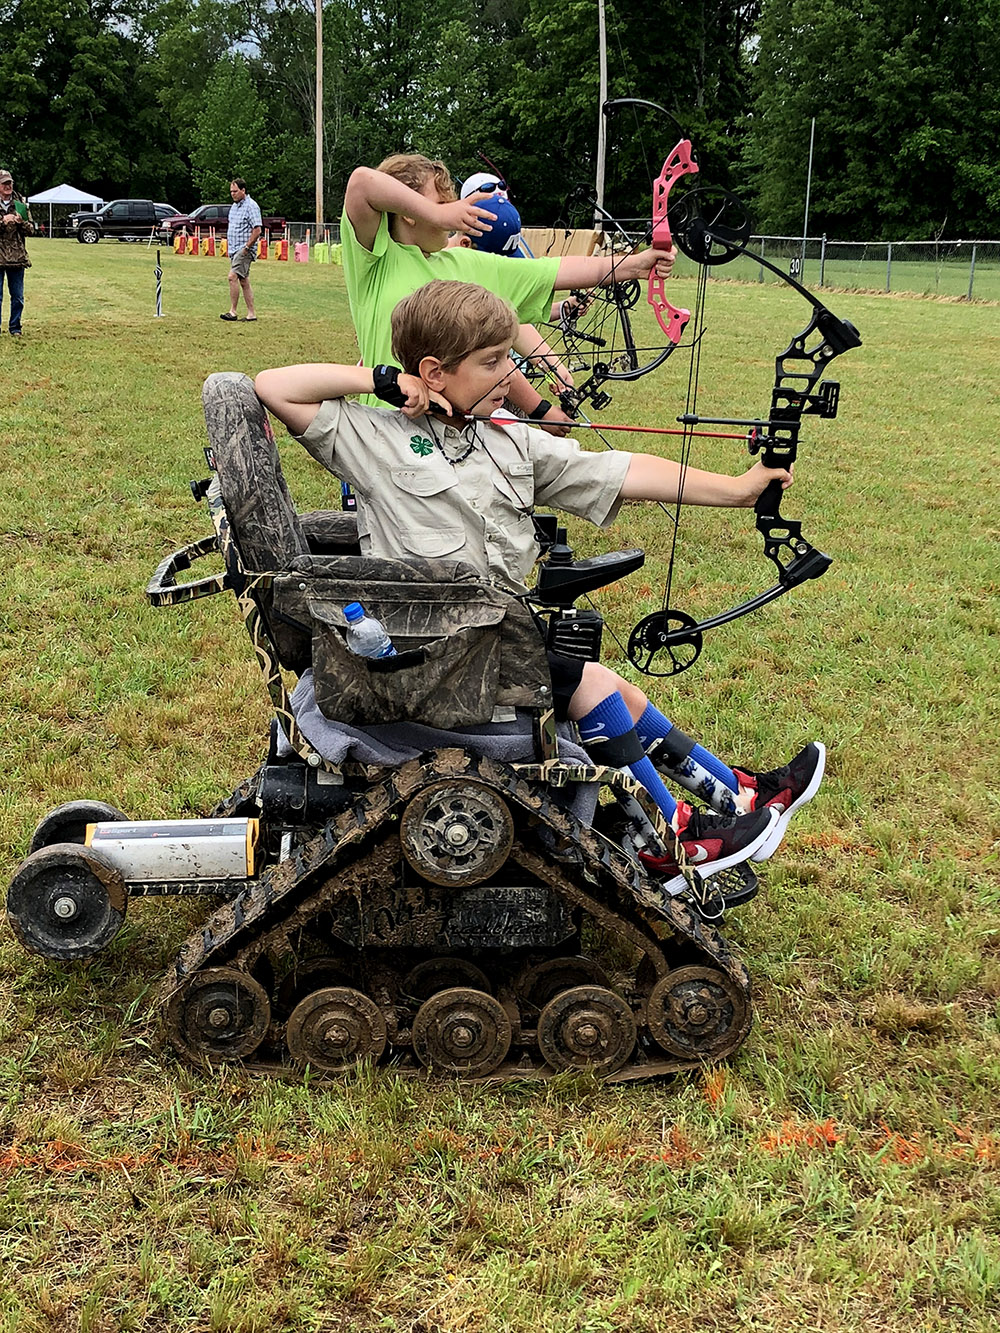 A shooting sport participant aims his bow and arrow while sitting in his specially designed wheel chair.